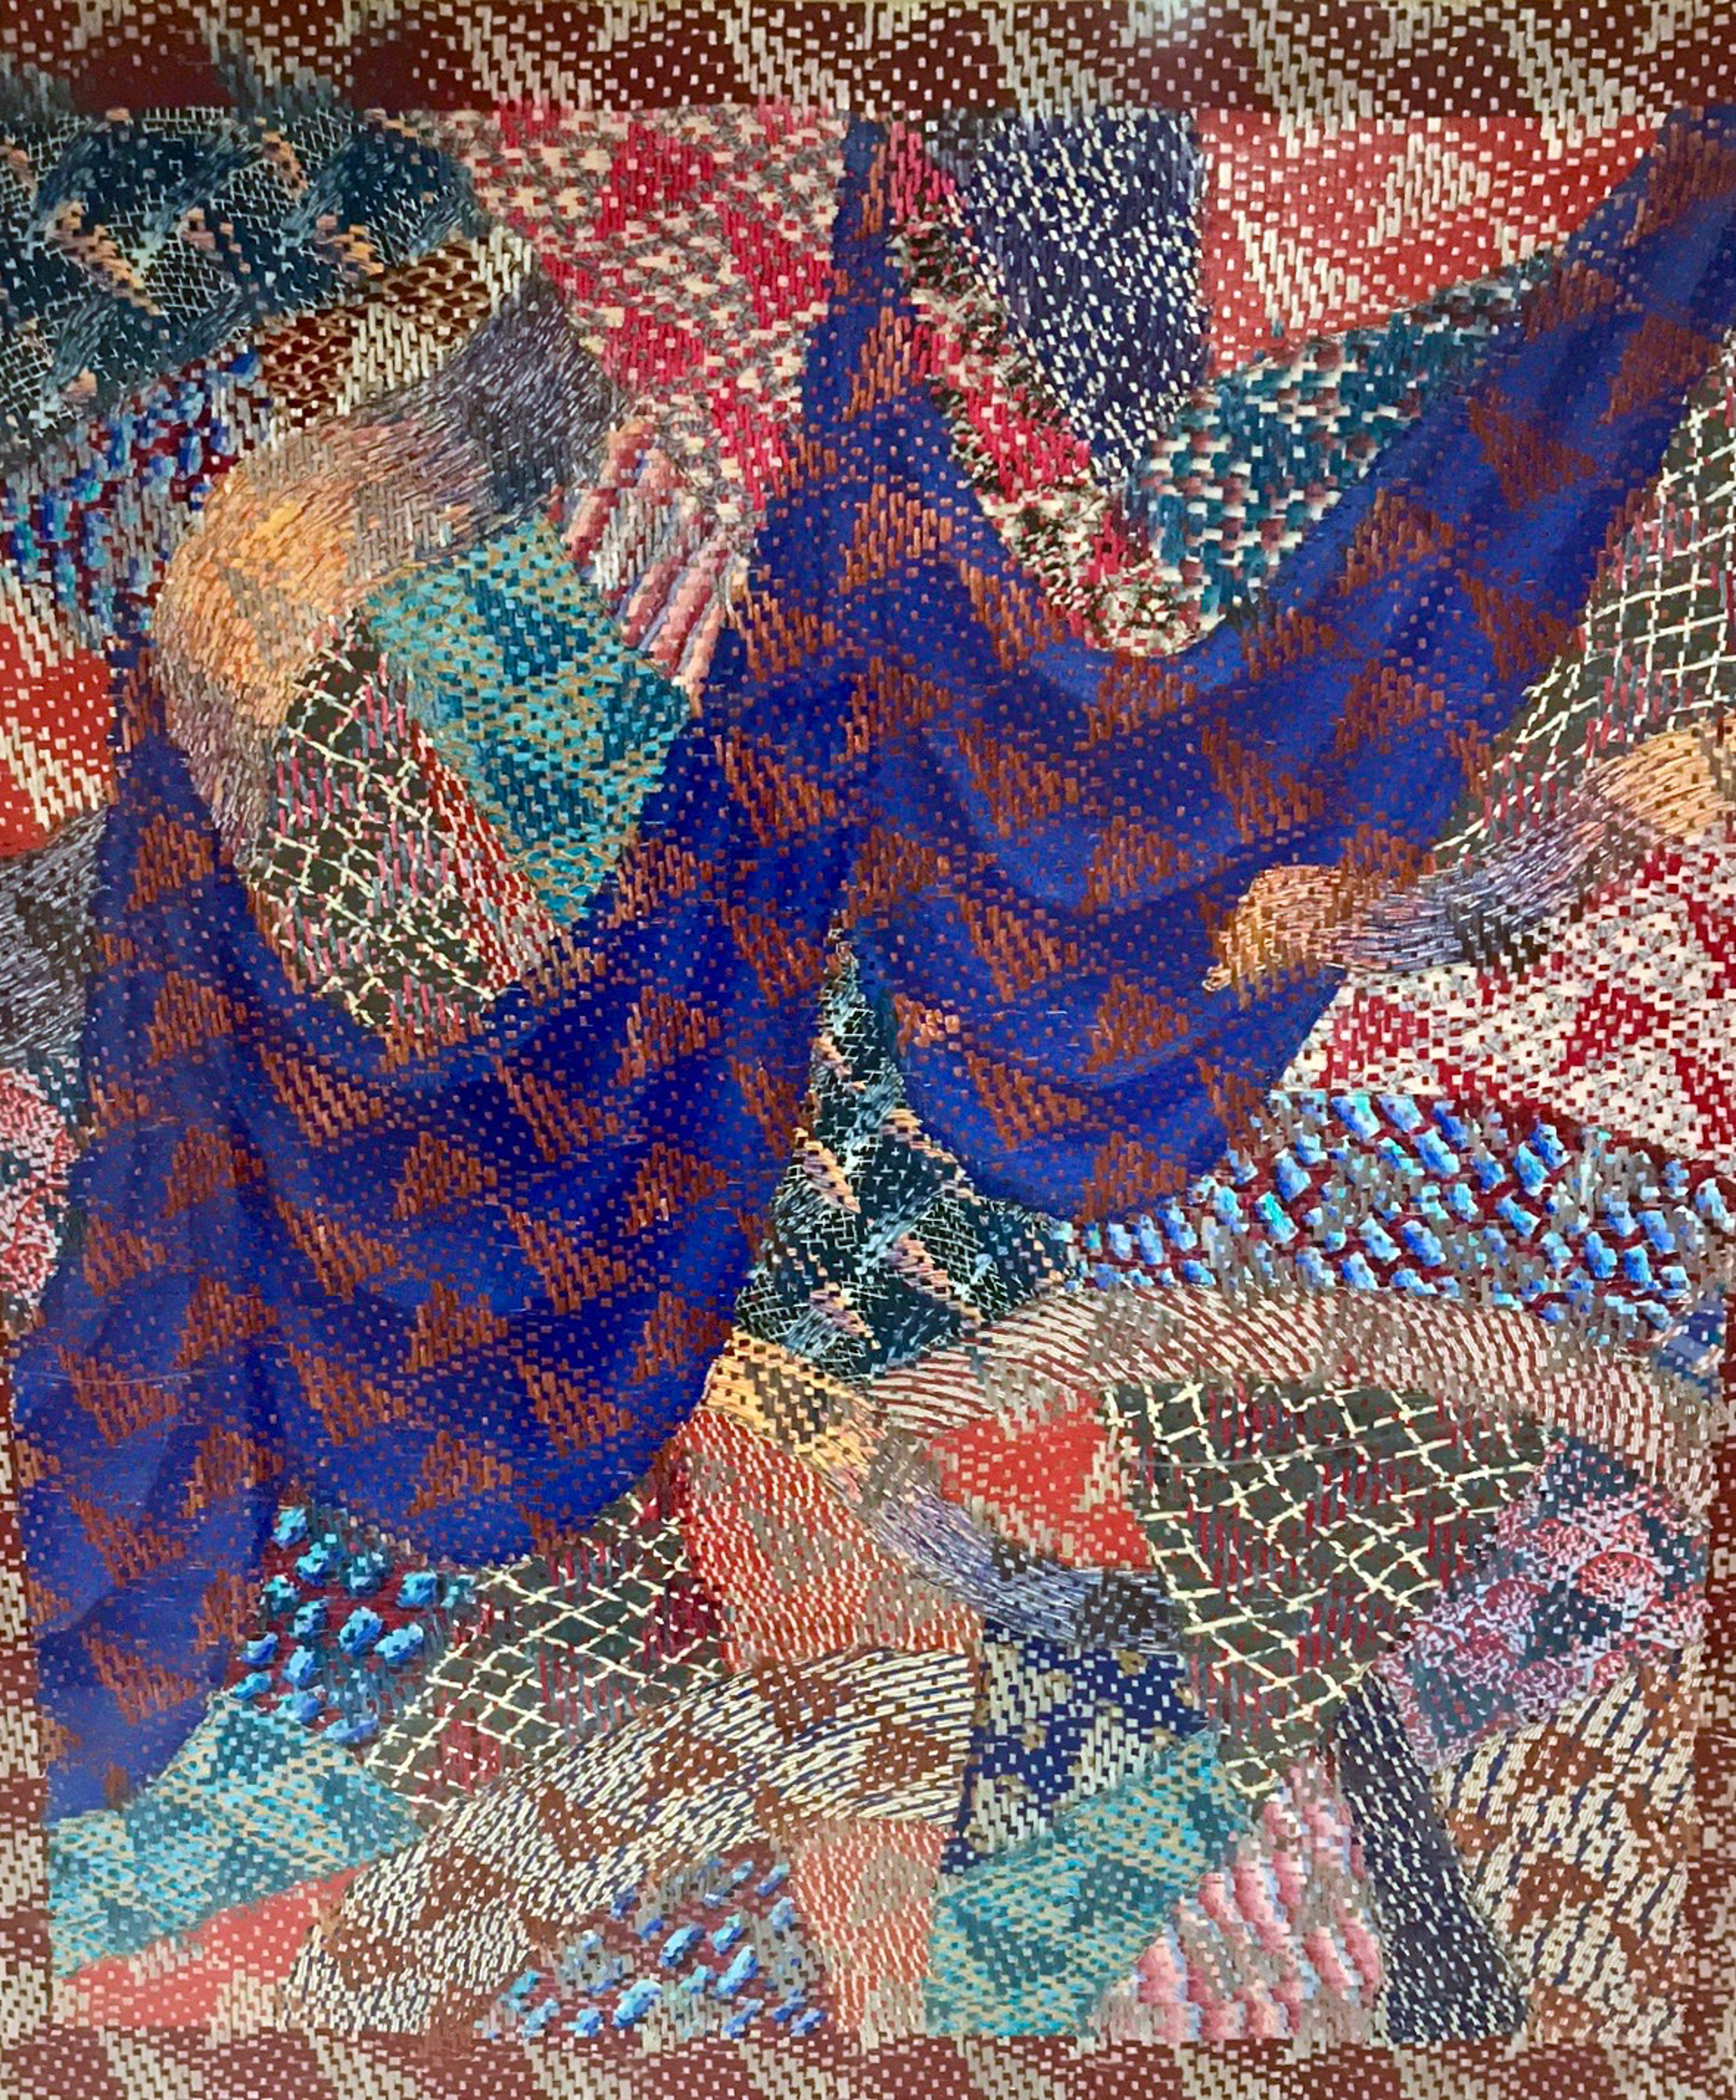 Crazy Quilt Royal Remnants II by Lia Cook